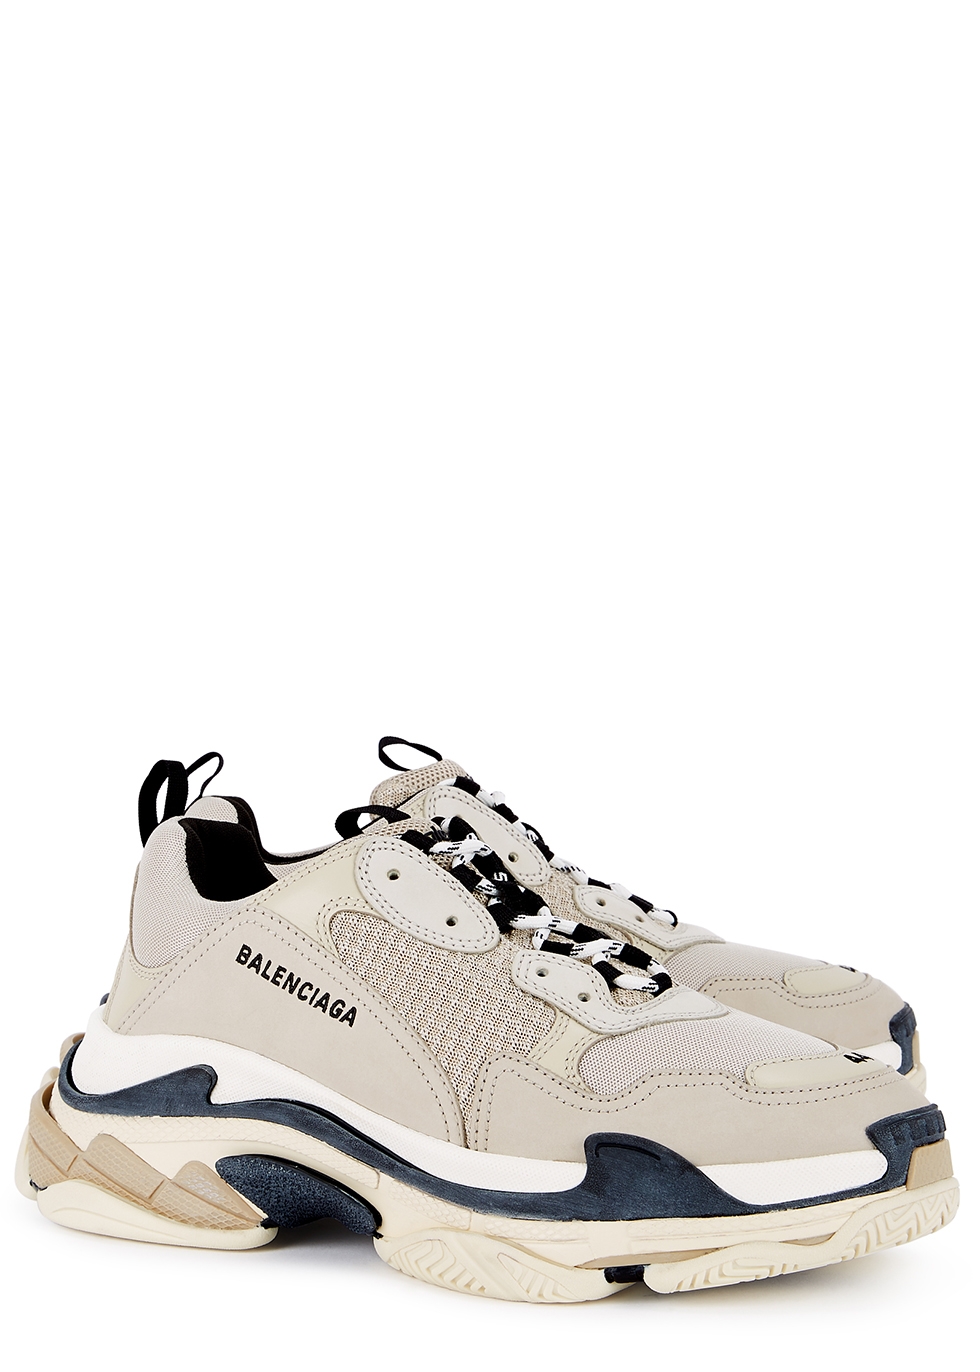 Balenciaga Leather Triple S Sneakers in Blue Grey Blue for